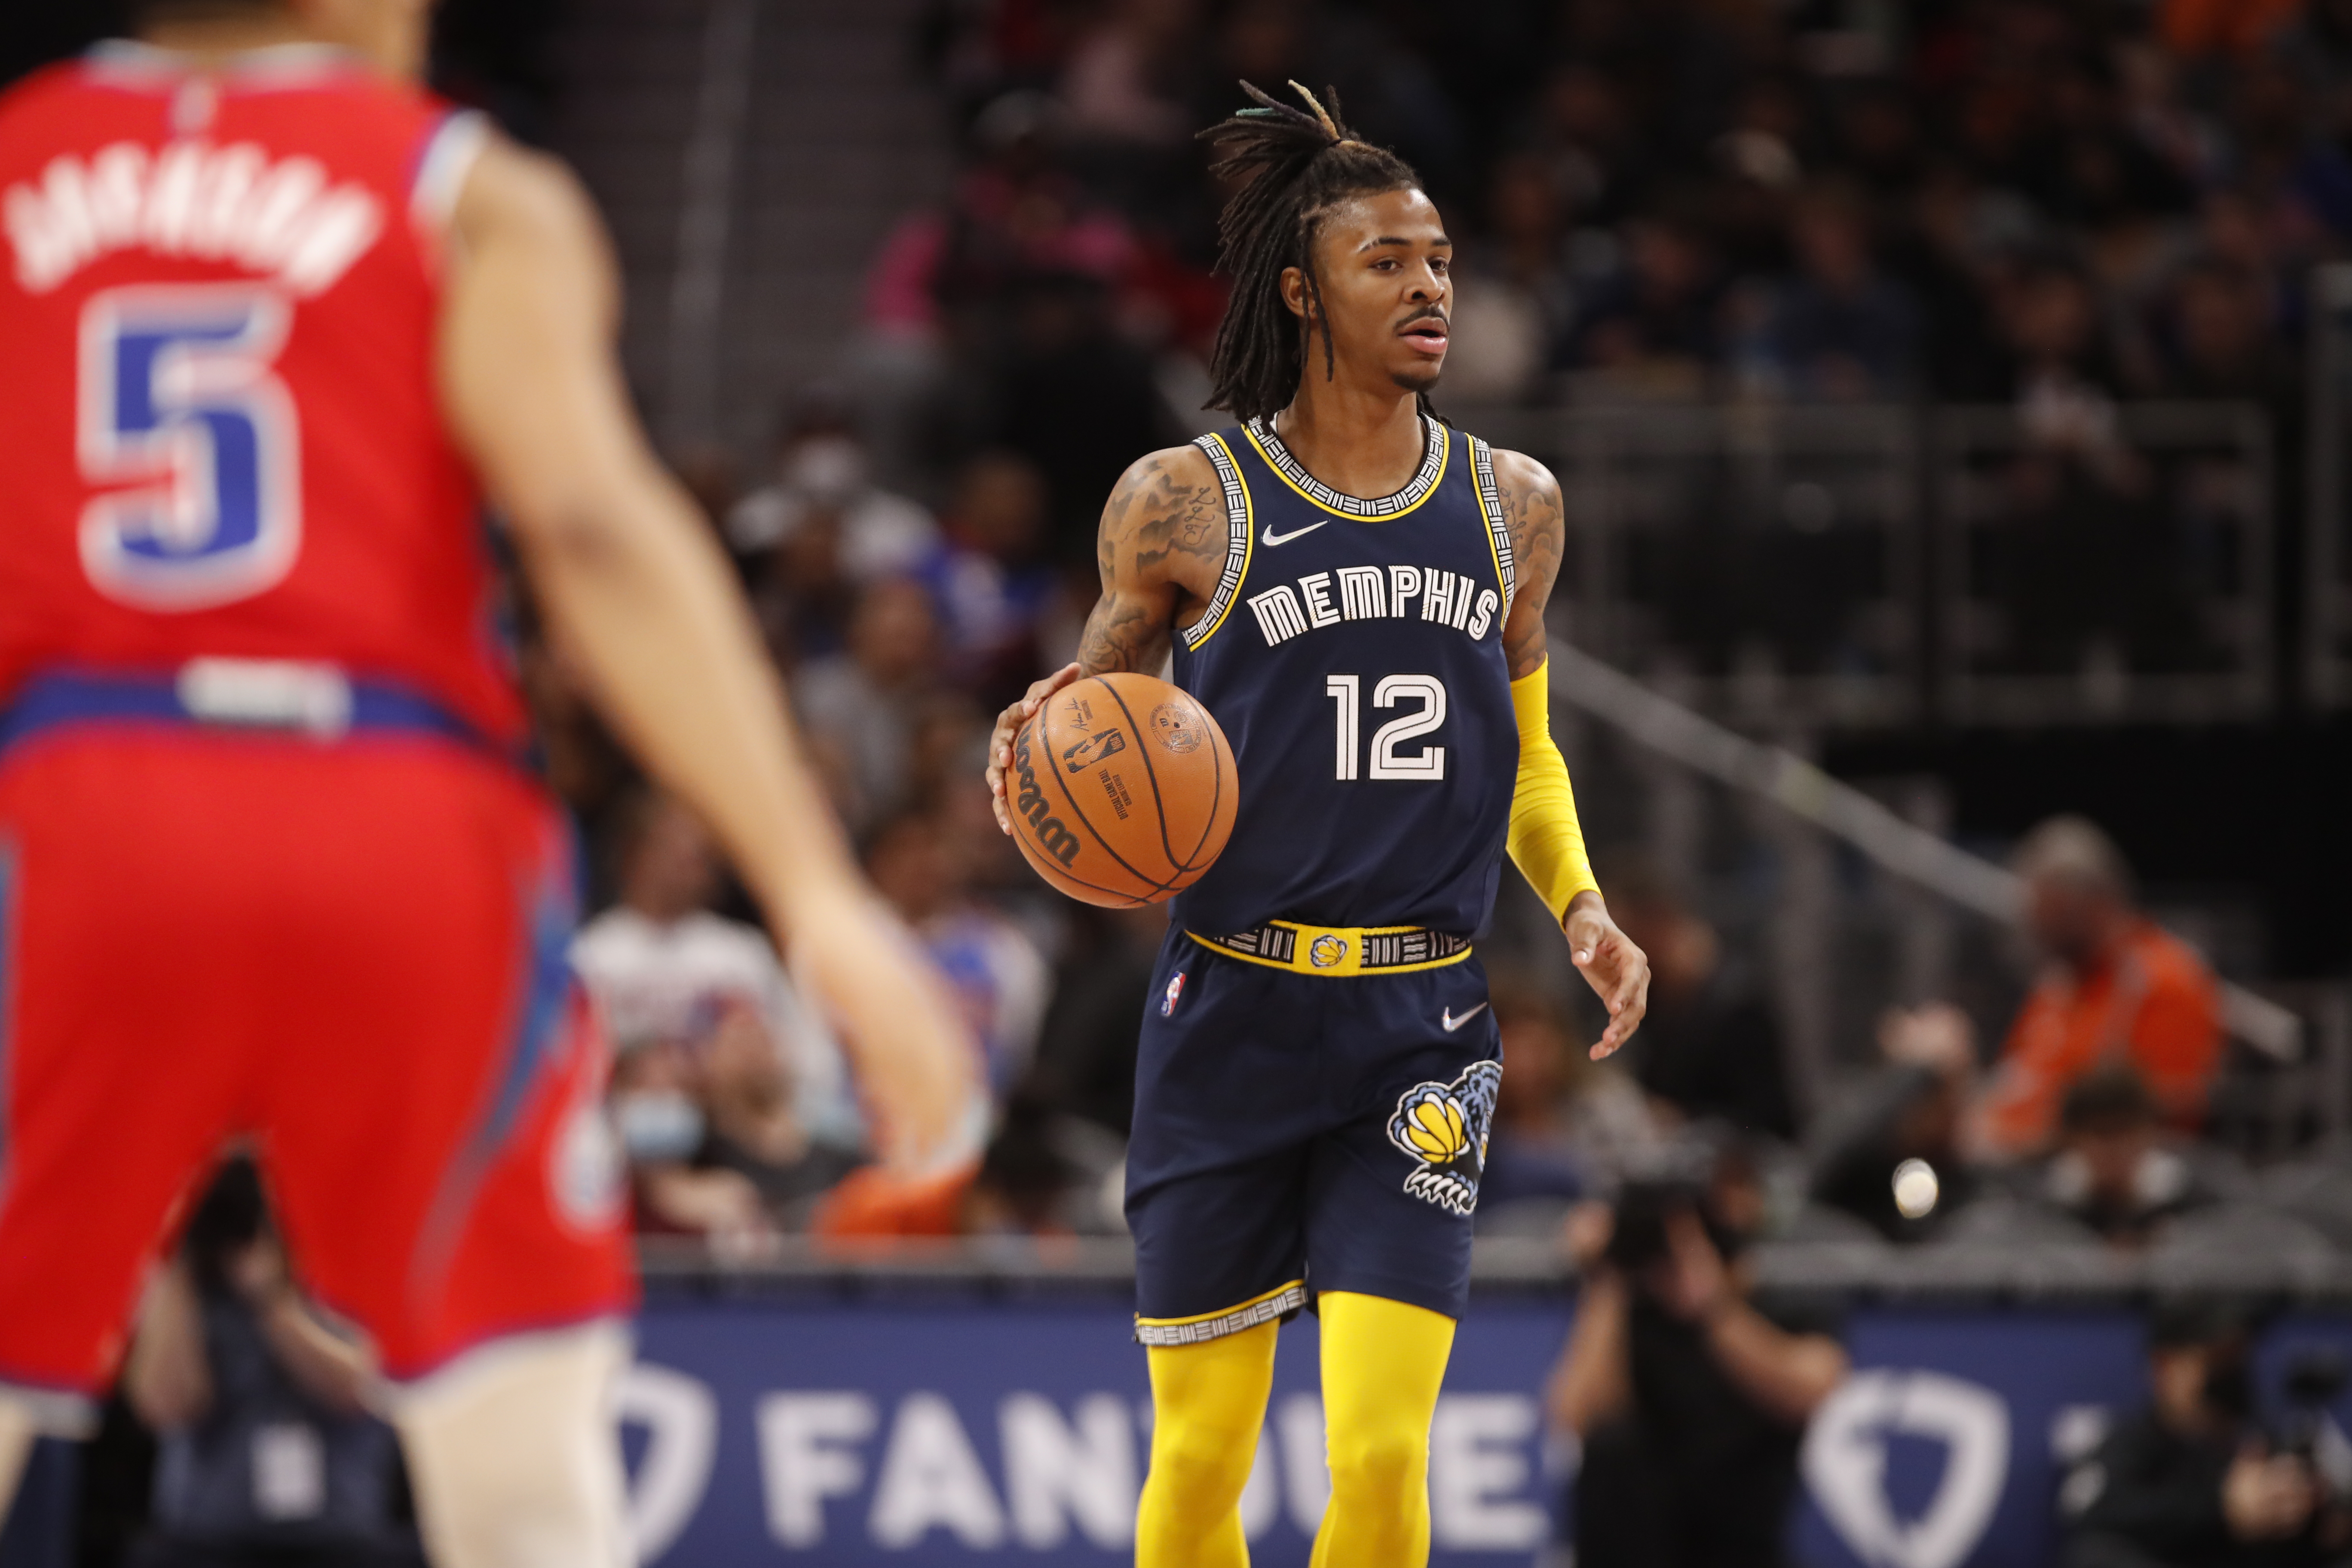 Ja Morant #12 of the Memphis Grizzlies handles the ball during the game against the Detroit Pistons on February 10, 2022 at Little Caesars Arena in Detroit, Michigan.&nbsp;